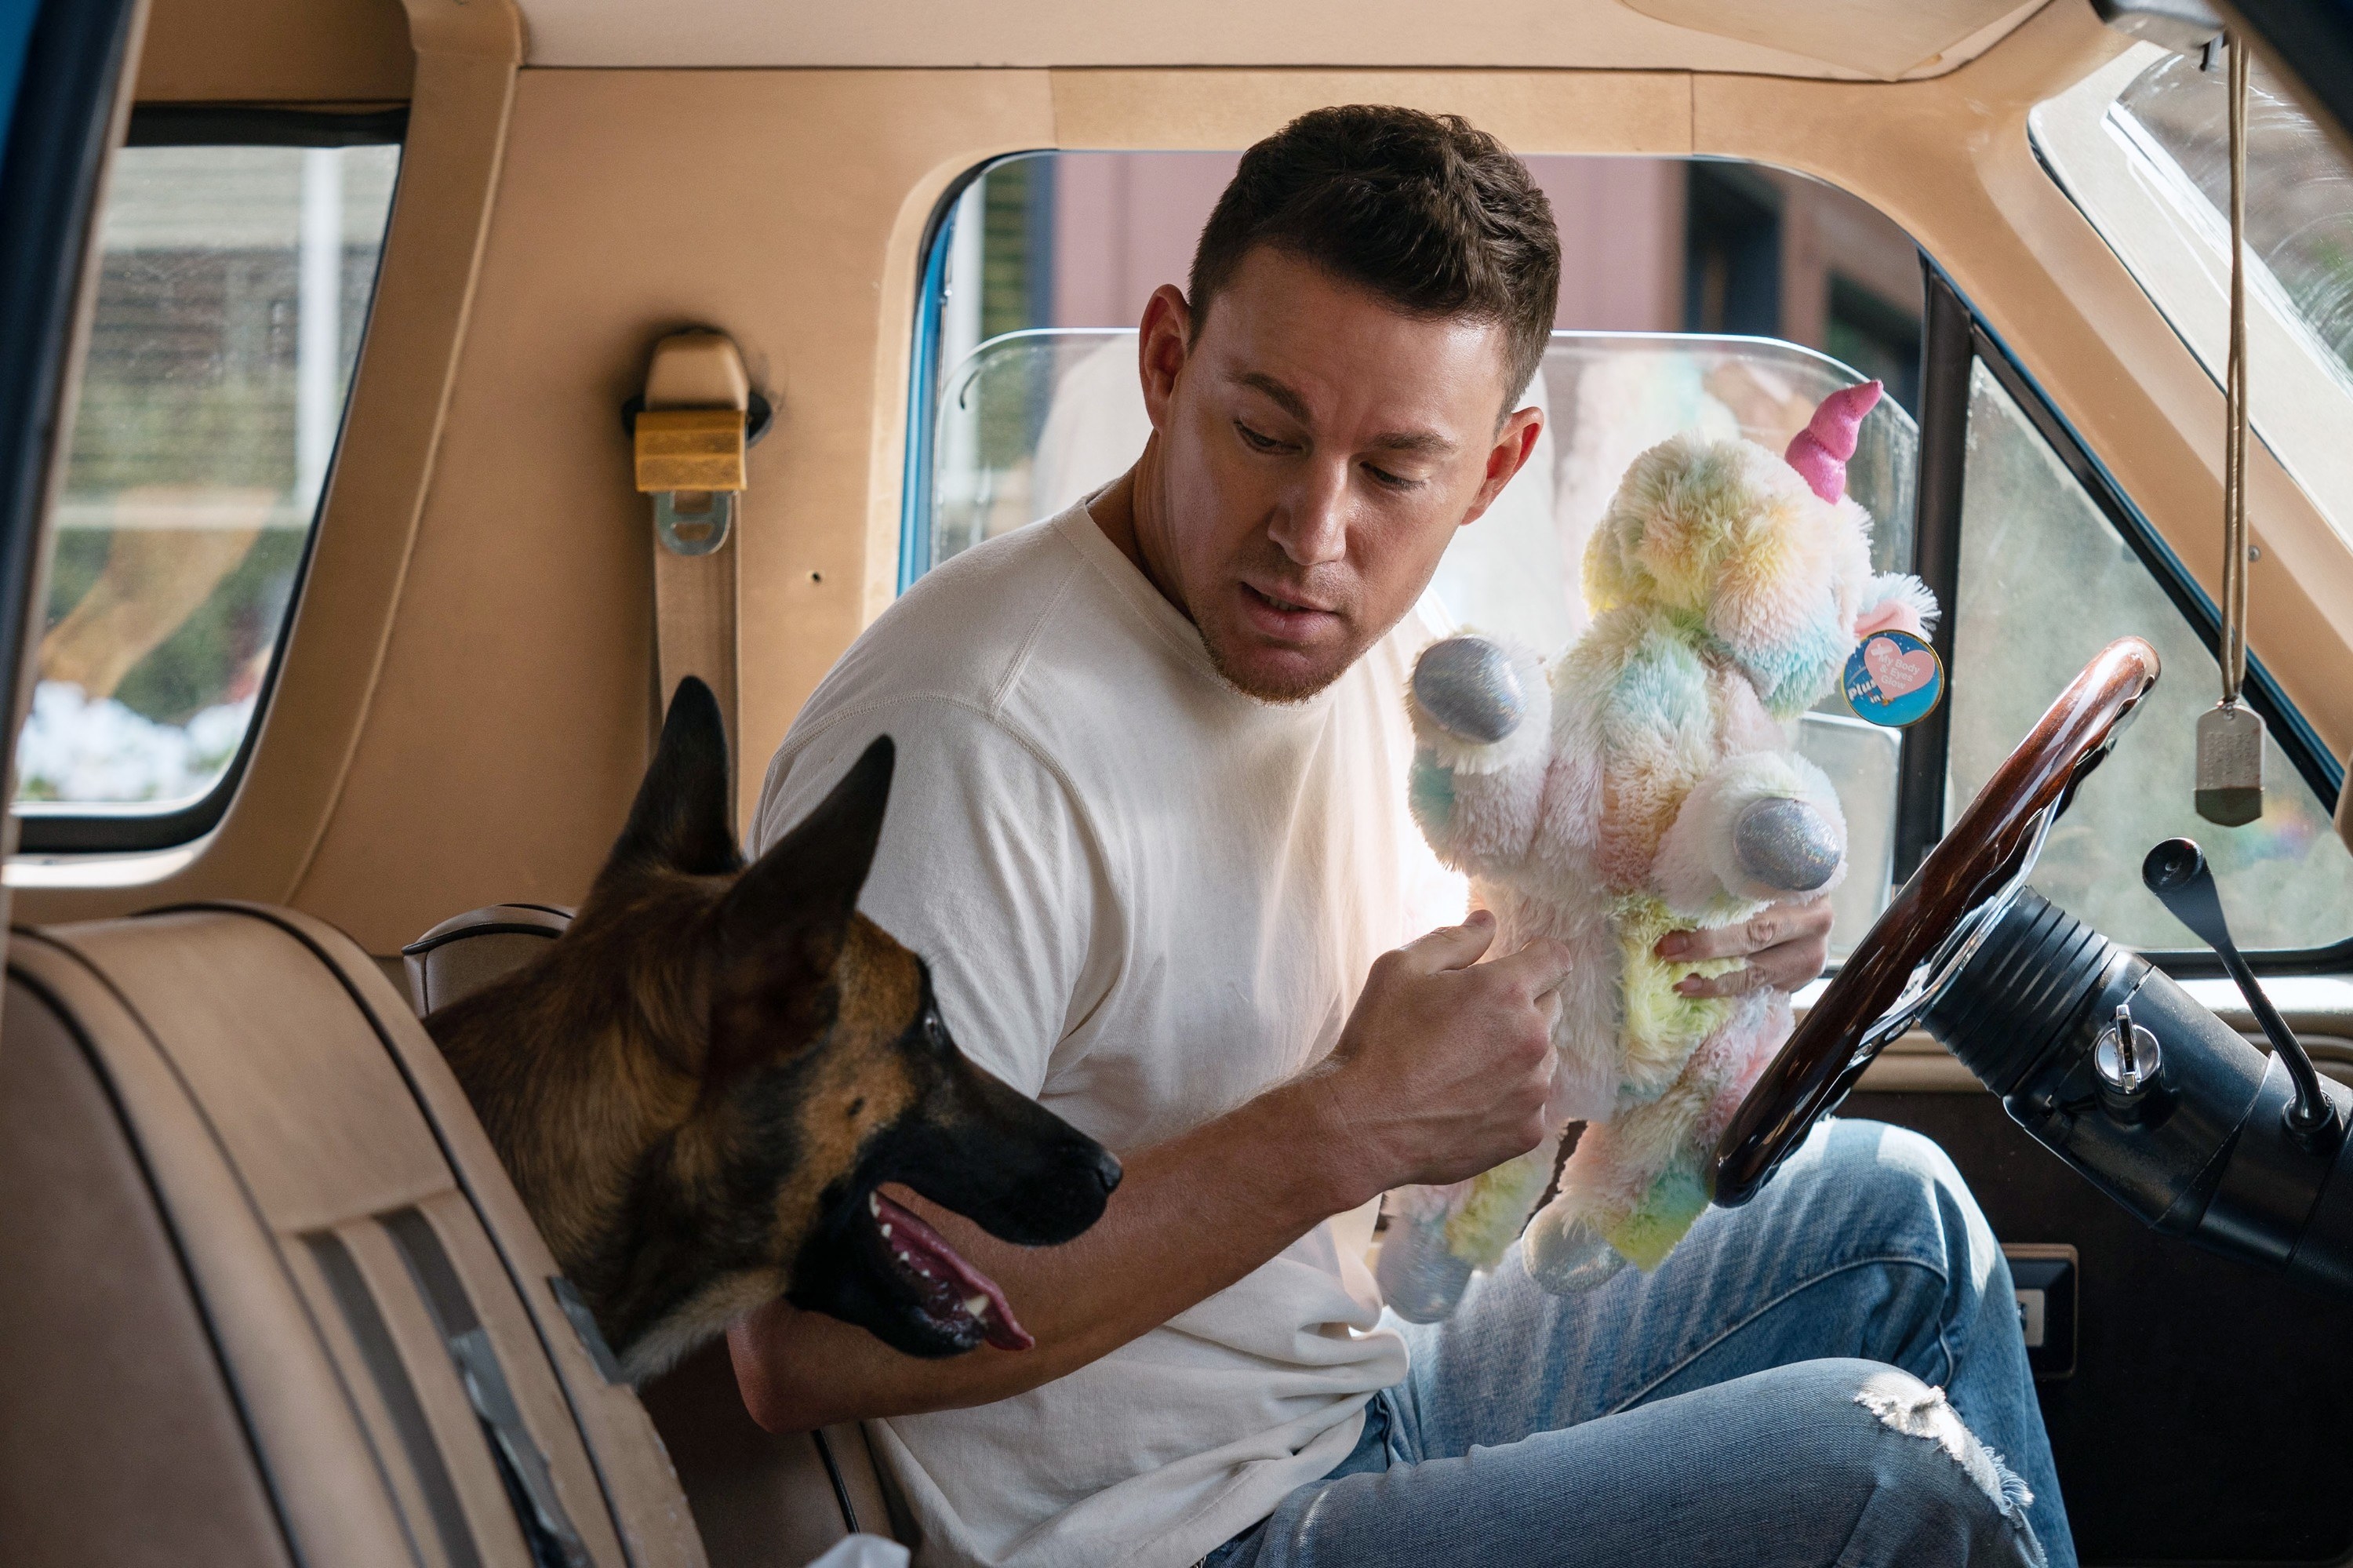 Tatum in a car with his dog and holding a unicorn toy for her